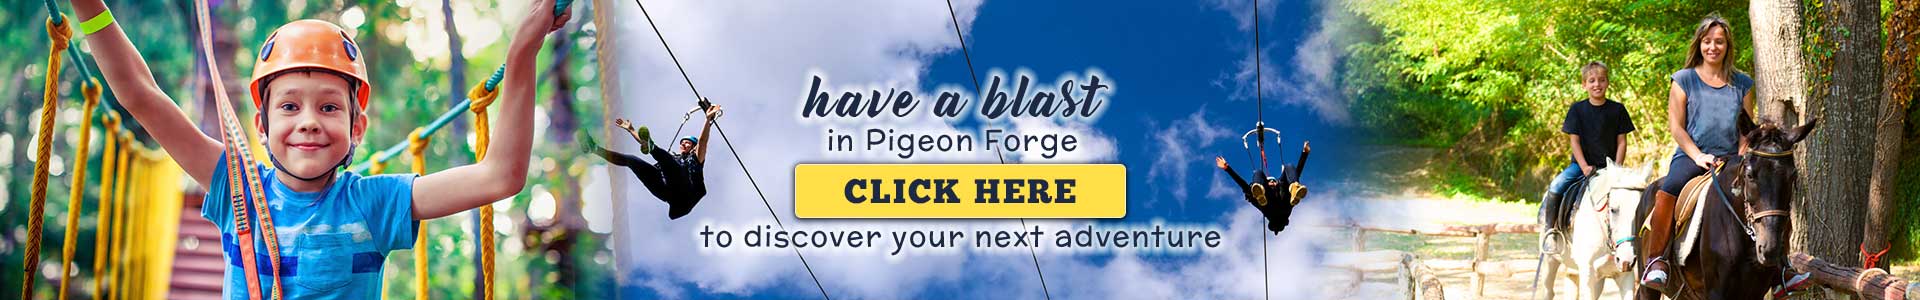 Things To Do In Pigeon Forge: Click to visit page.